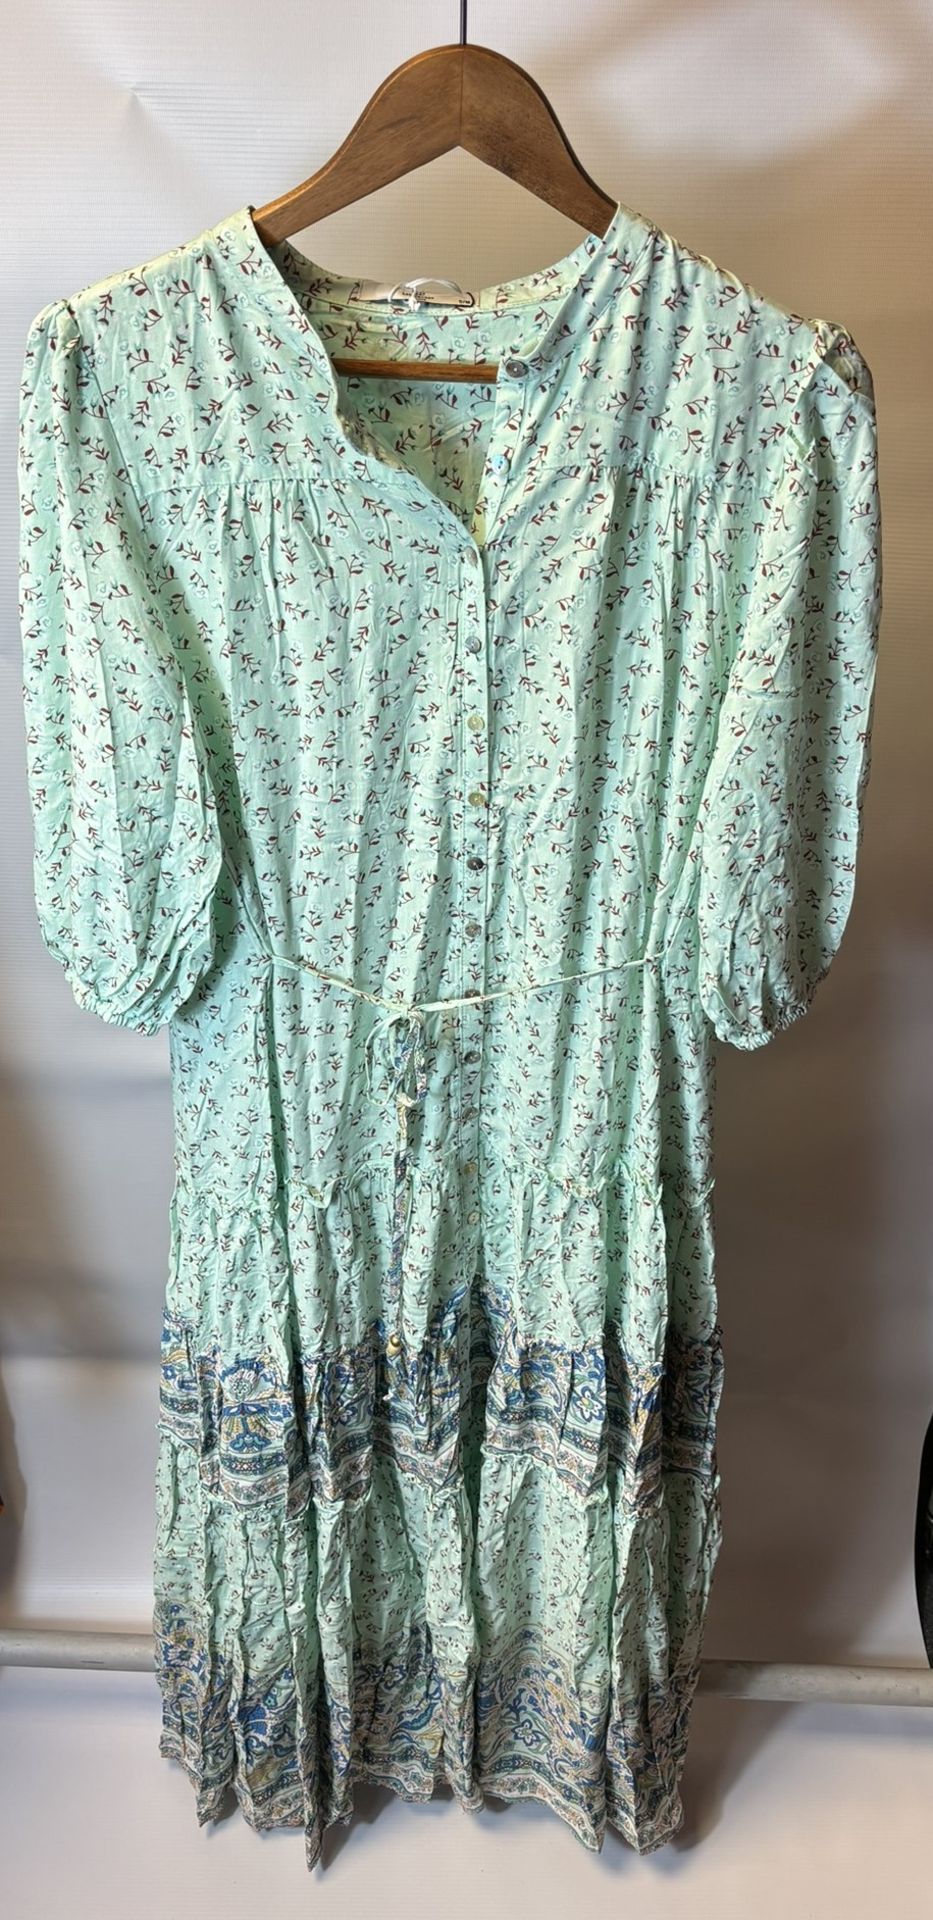 8 x Various Women's Dresses / Blouses / Blazers & Shirts As Seen In Photos - Image 4 of 24